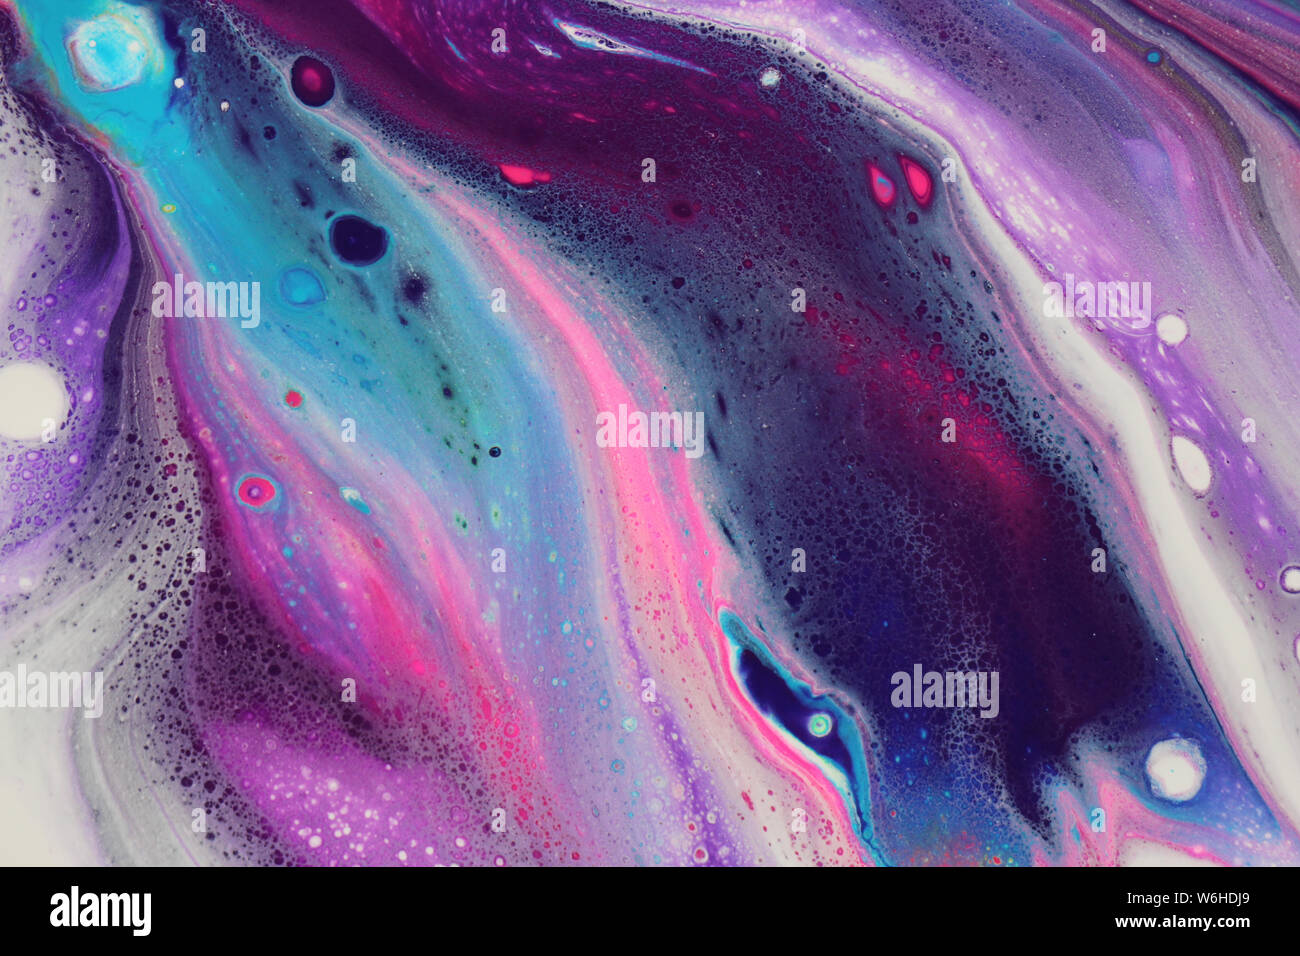 Cool colors abstract acrylic painting with downward sloping movement for backgrounds. Stock Photo